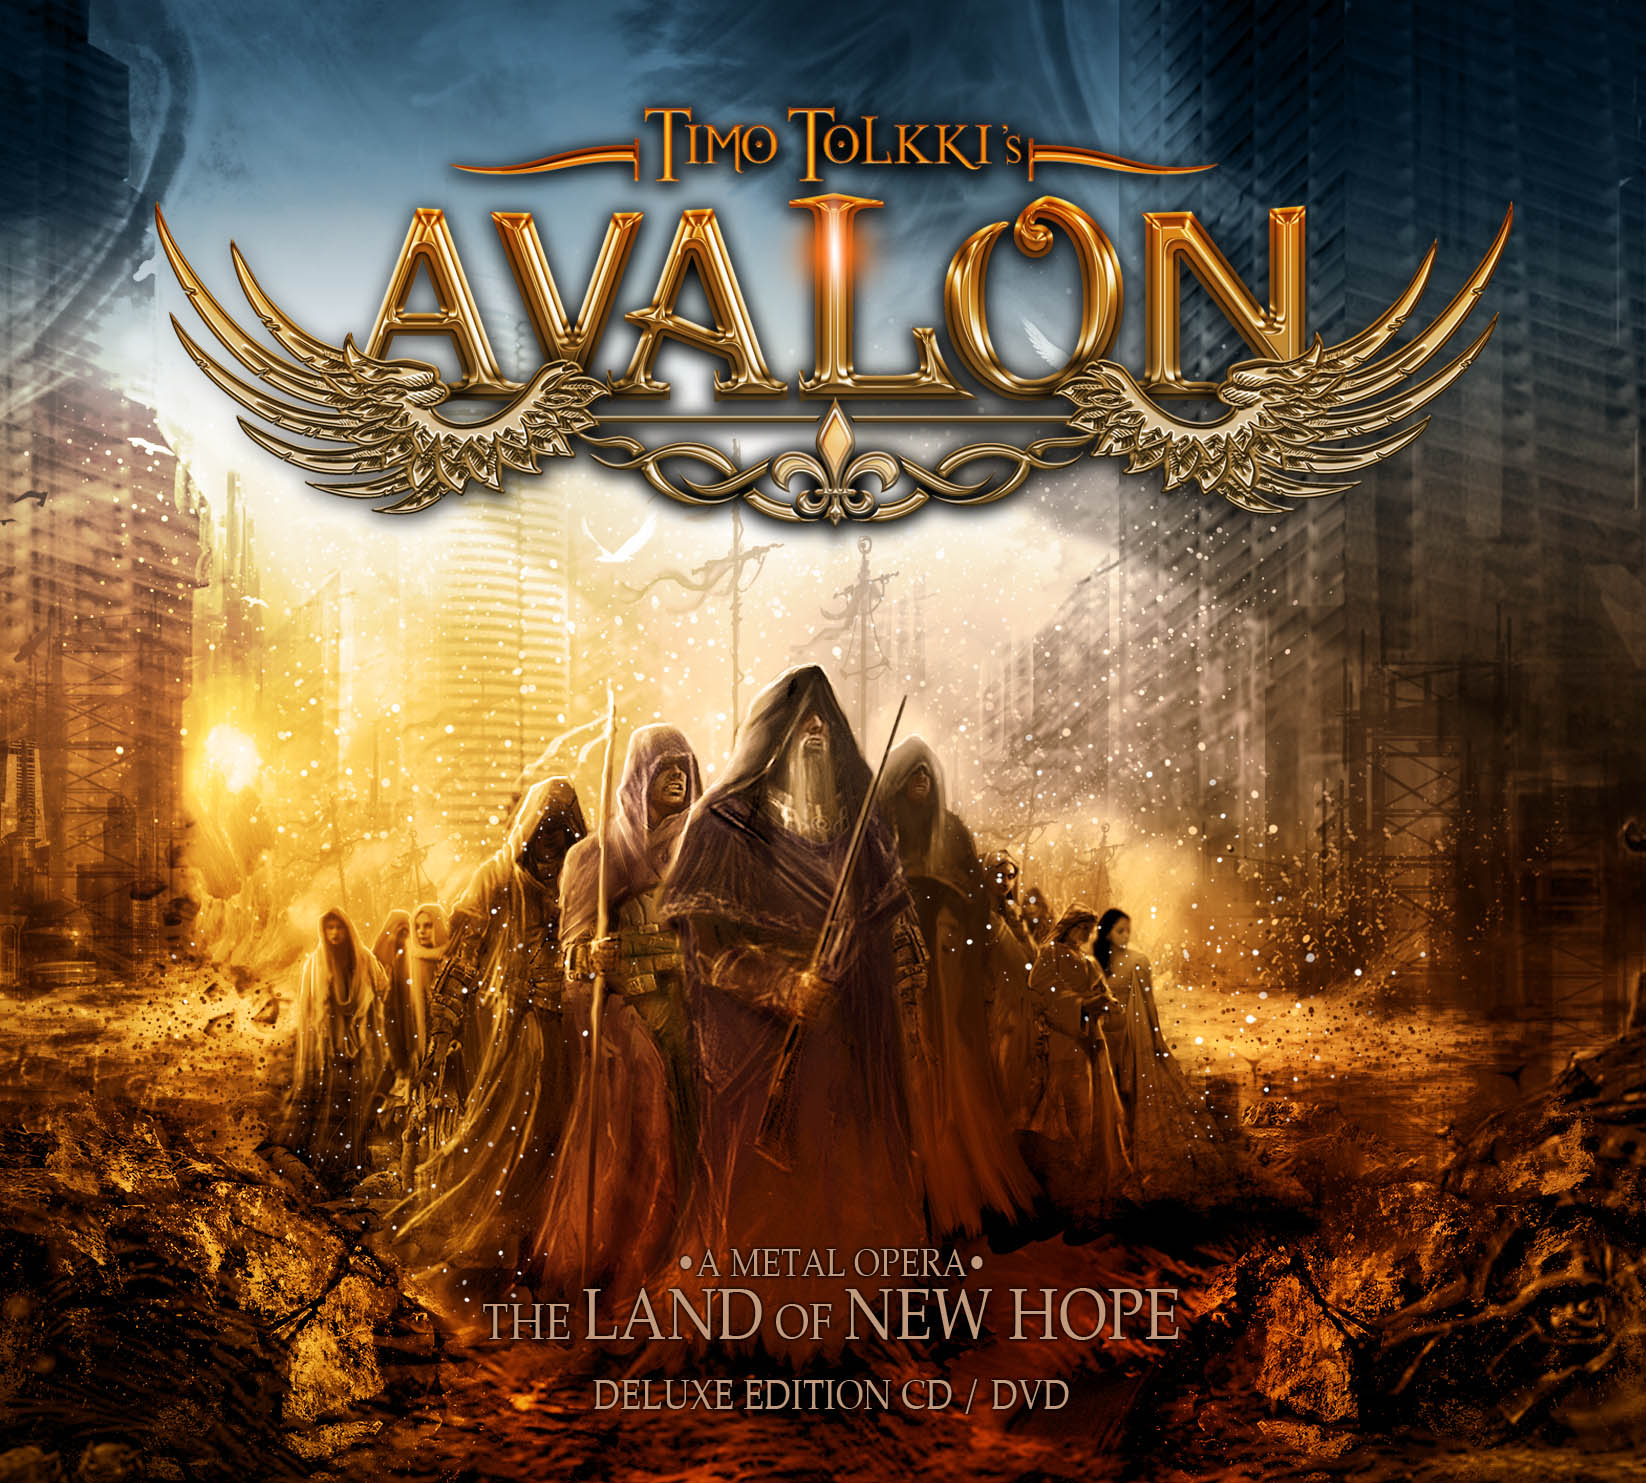 Timo Tolkki’s Avalon - The Land of New Hope (CD + DVD Edition)